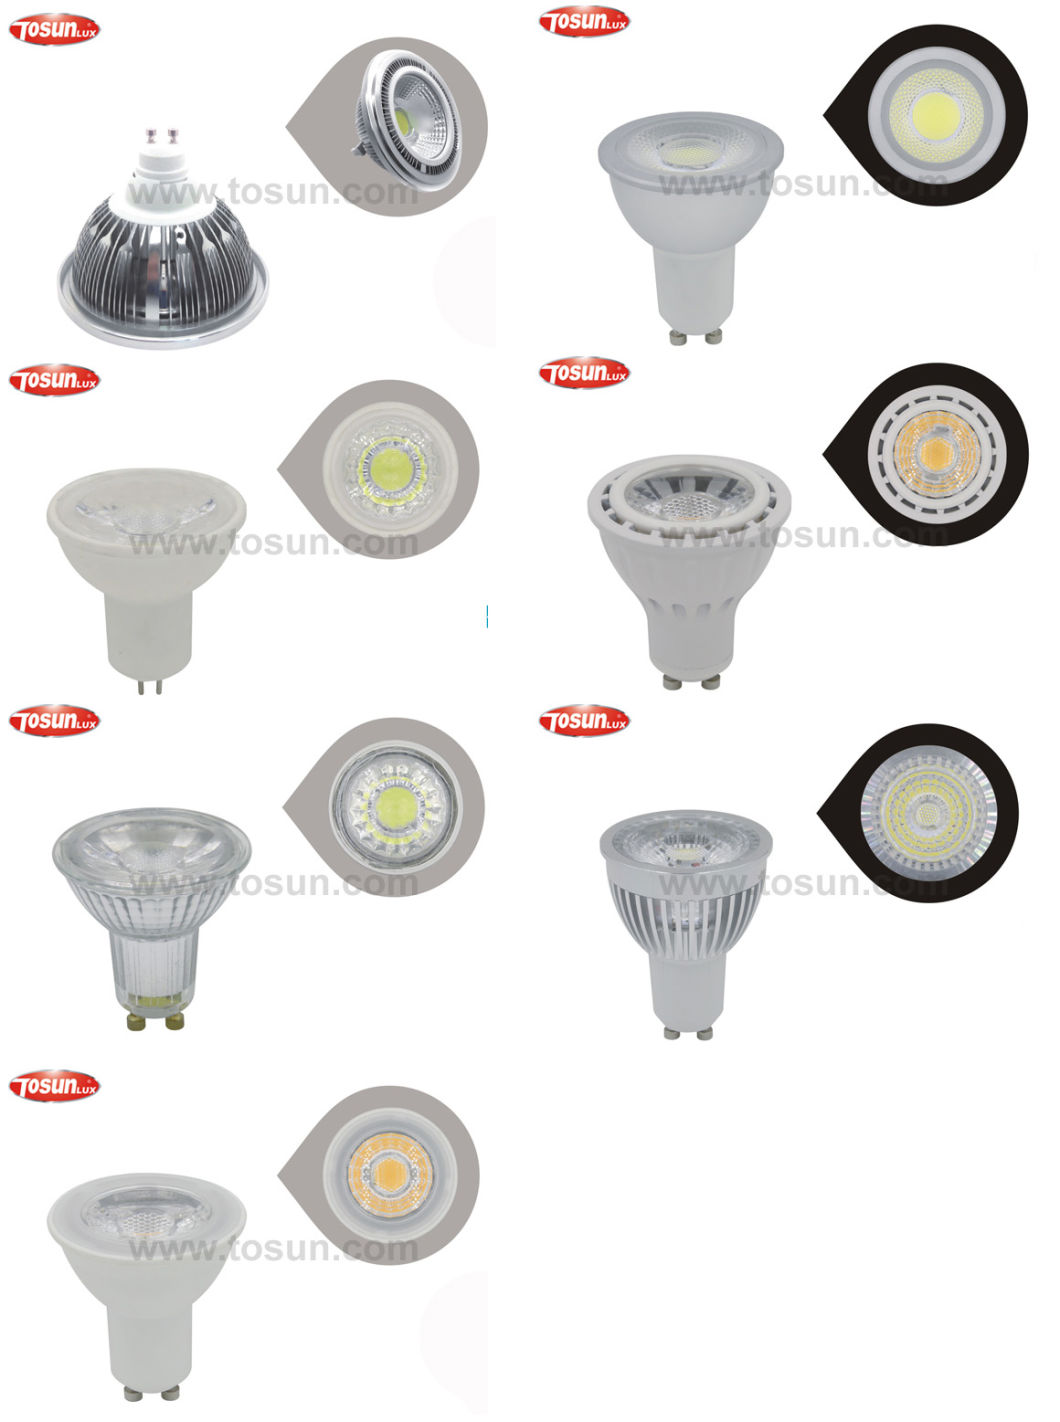 High Power LED Spotlight with 2 Years Warranty